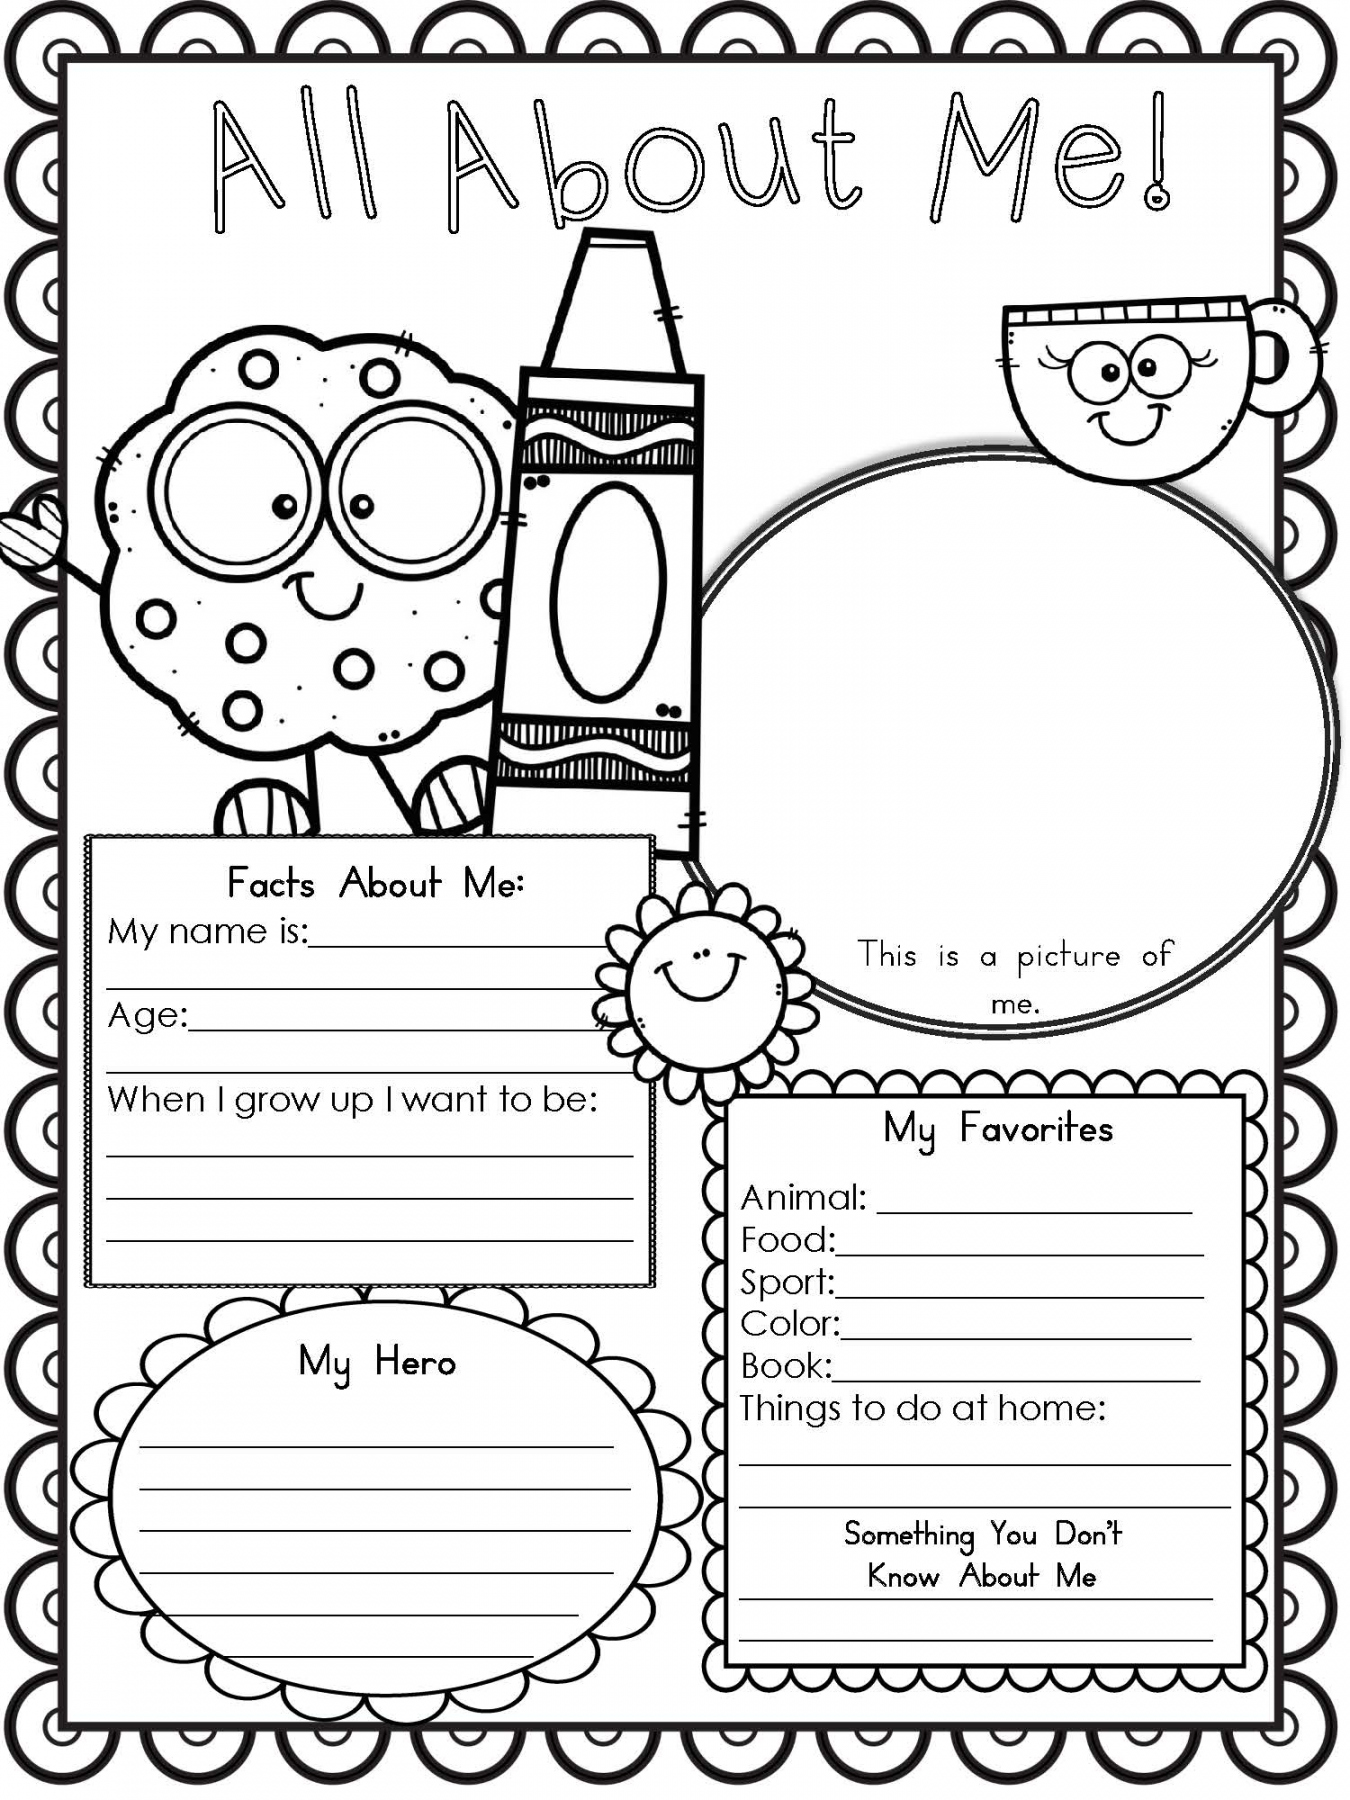 Free Printable All About Me Worksheet - Modern Homeschool Family - FREE Printables - Free Printable All About Me Worksheet